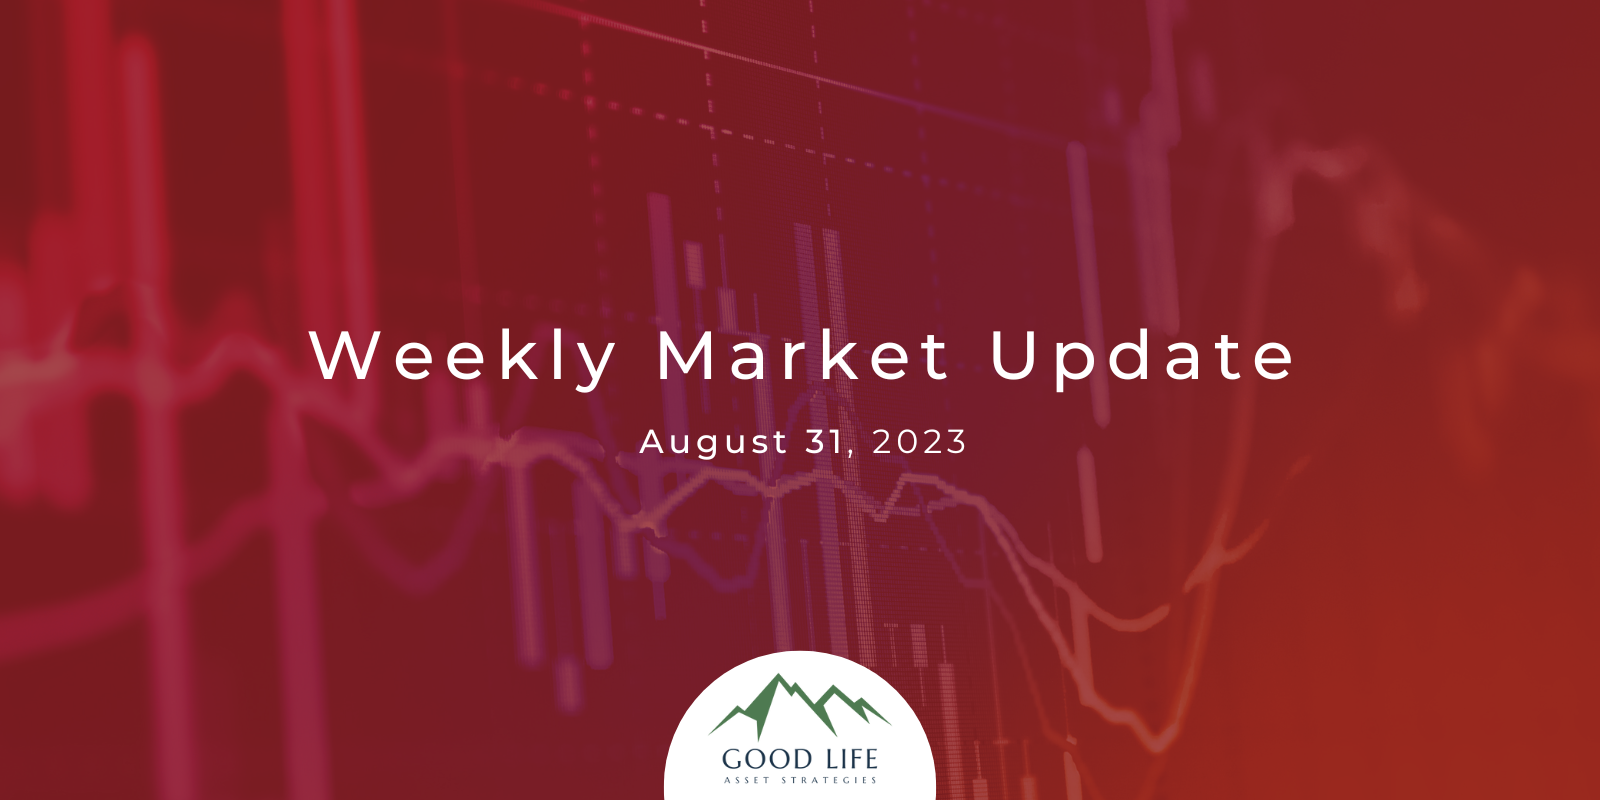 The Stock Market Bull Run Continues: Weekly Market Update for August 31, 2023, from DeWayne Hall